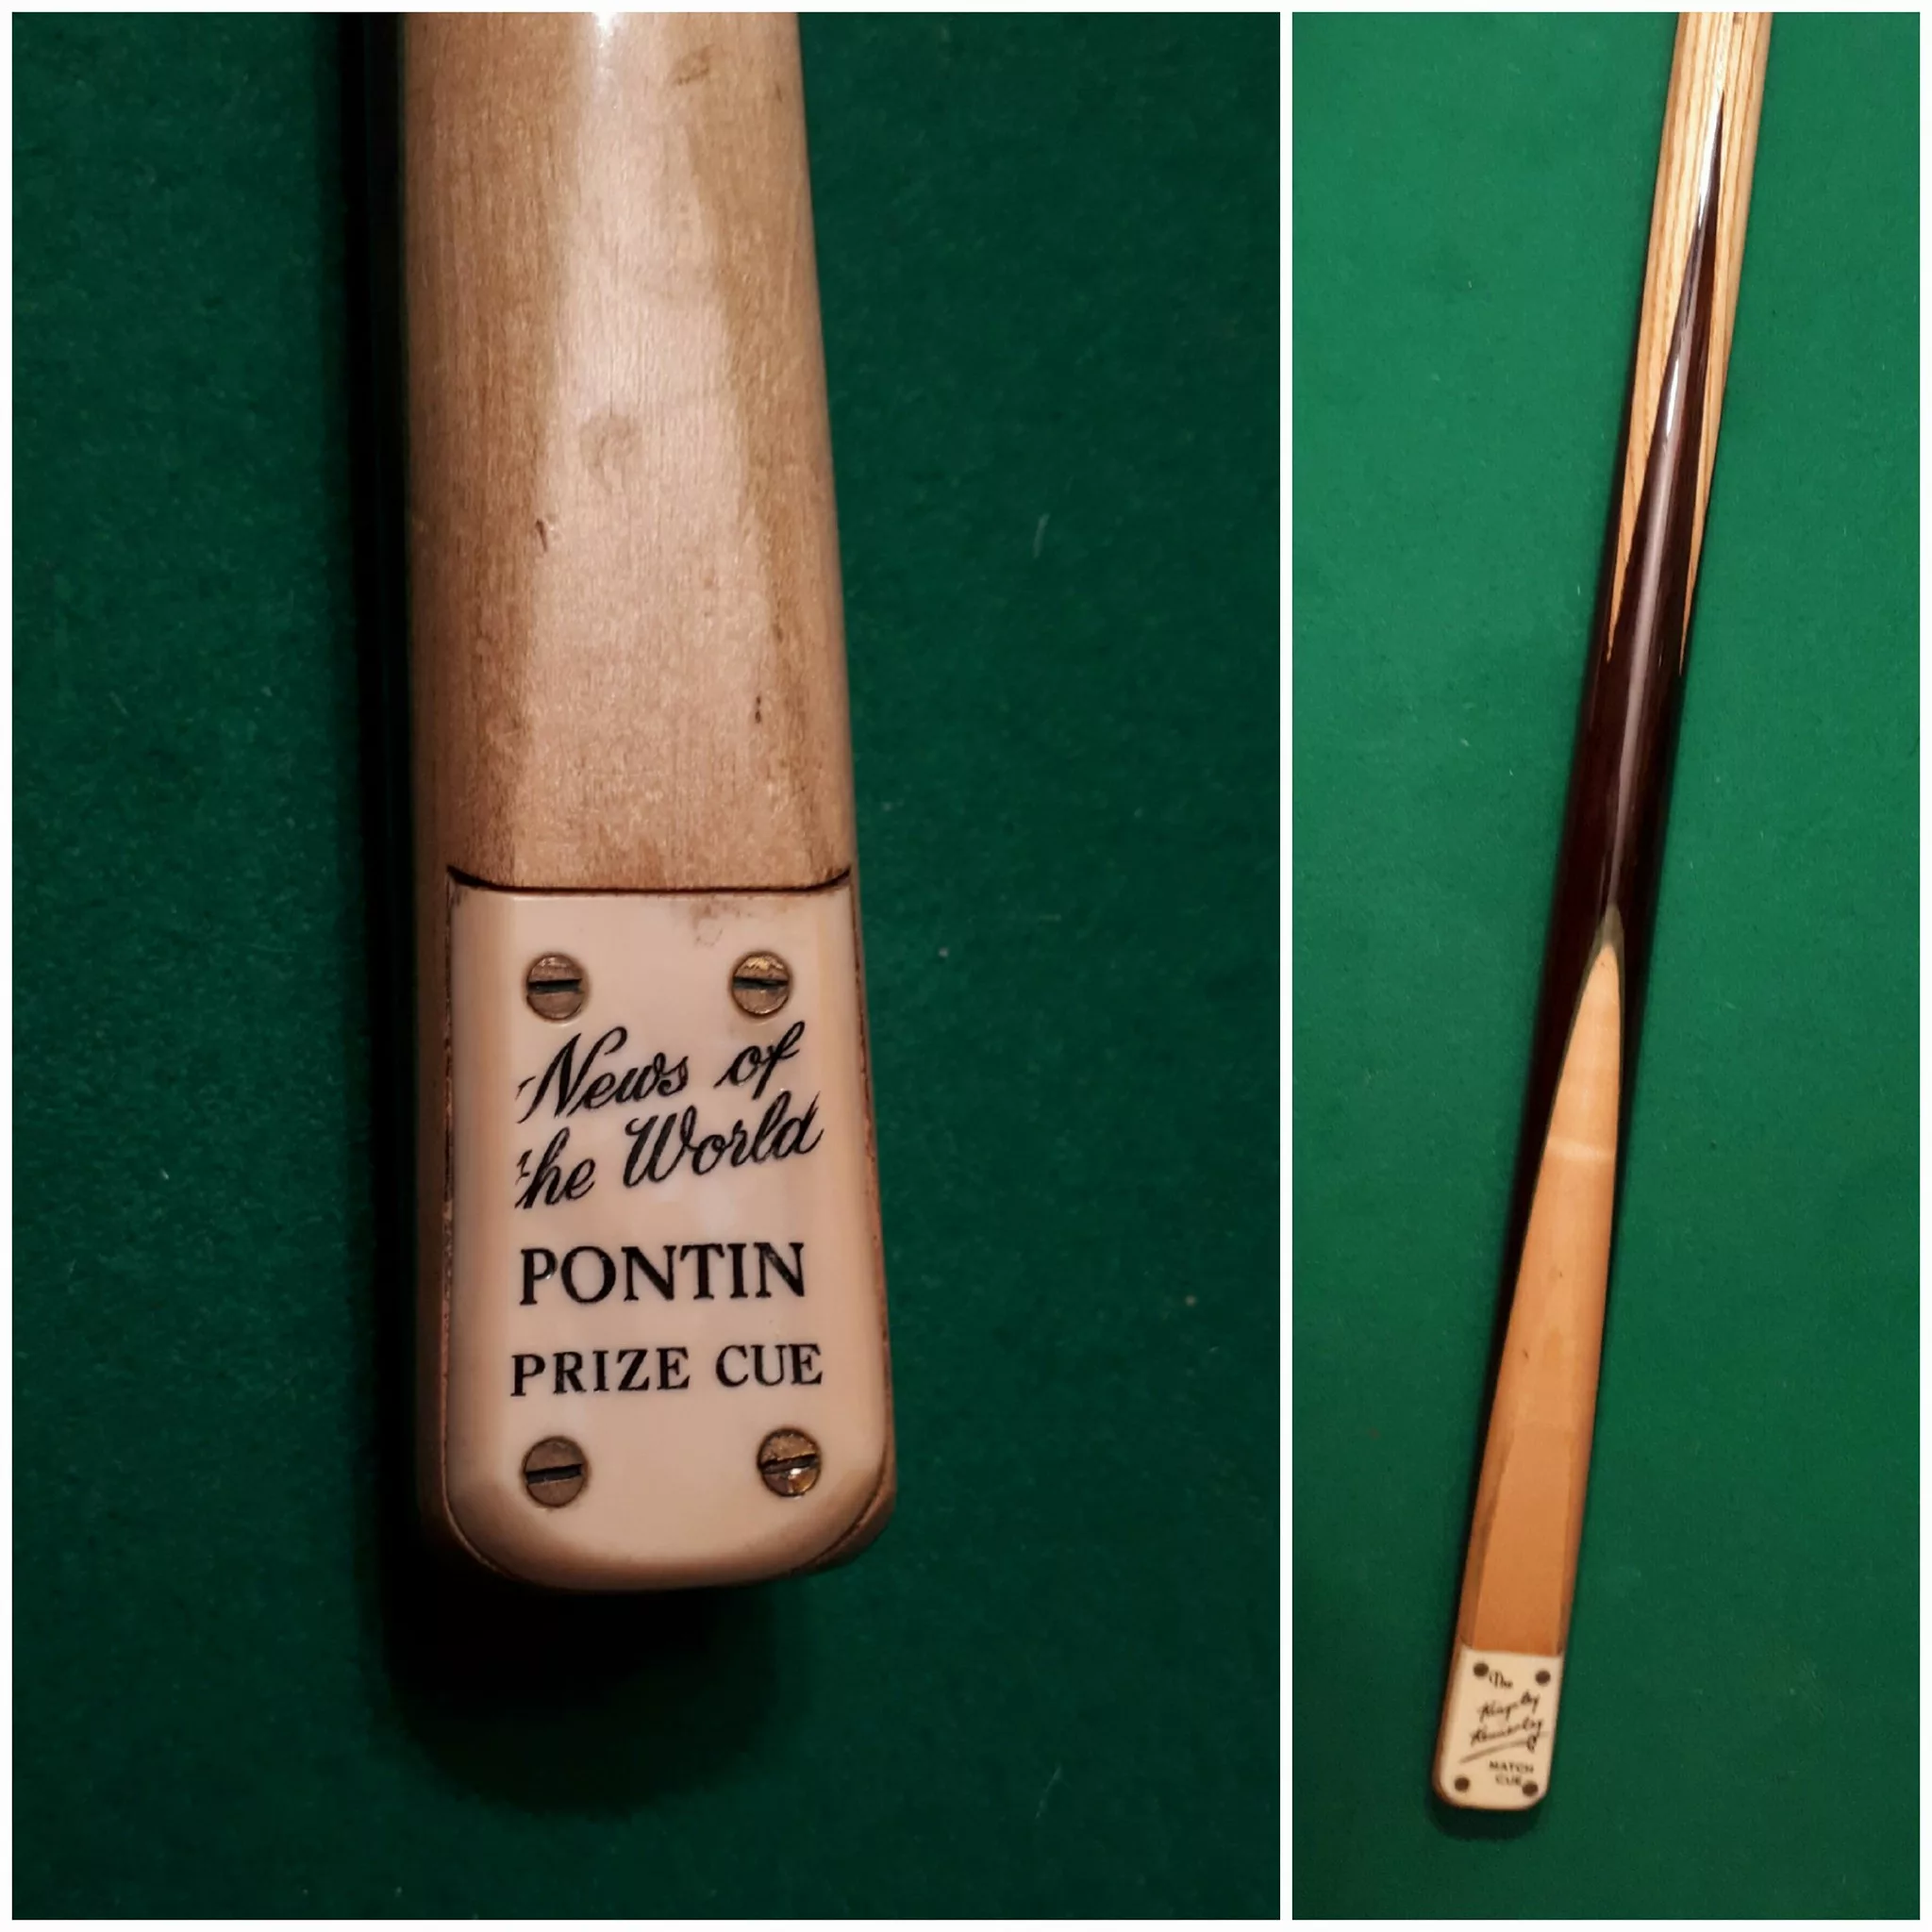 News of the World Pontin cue